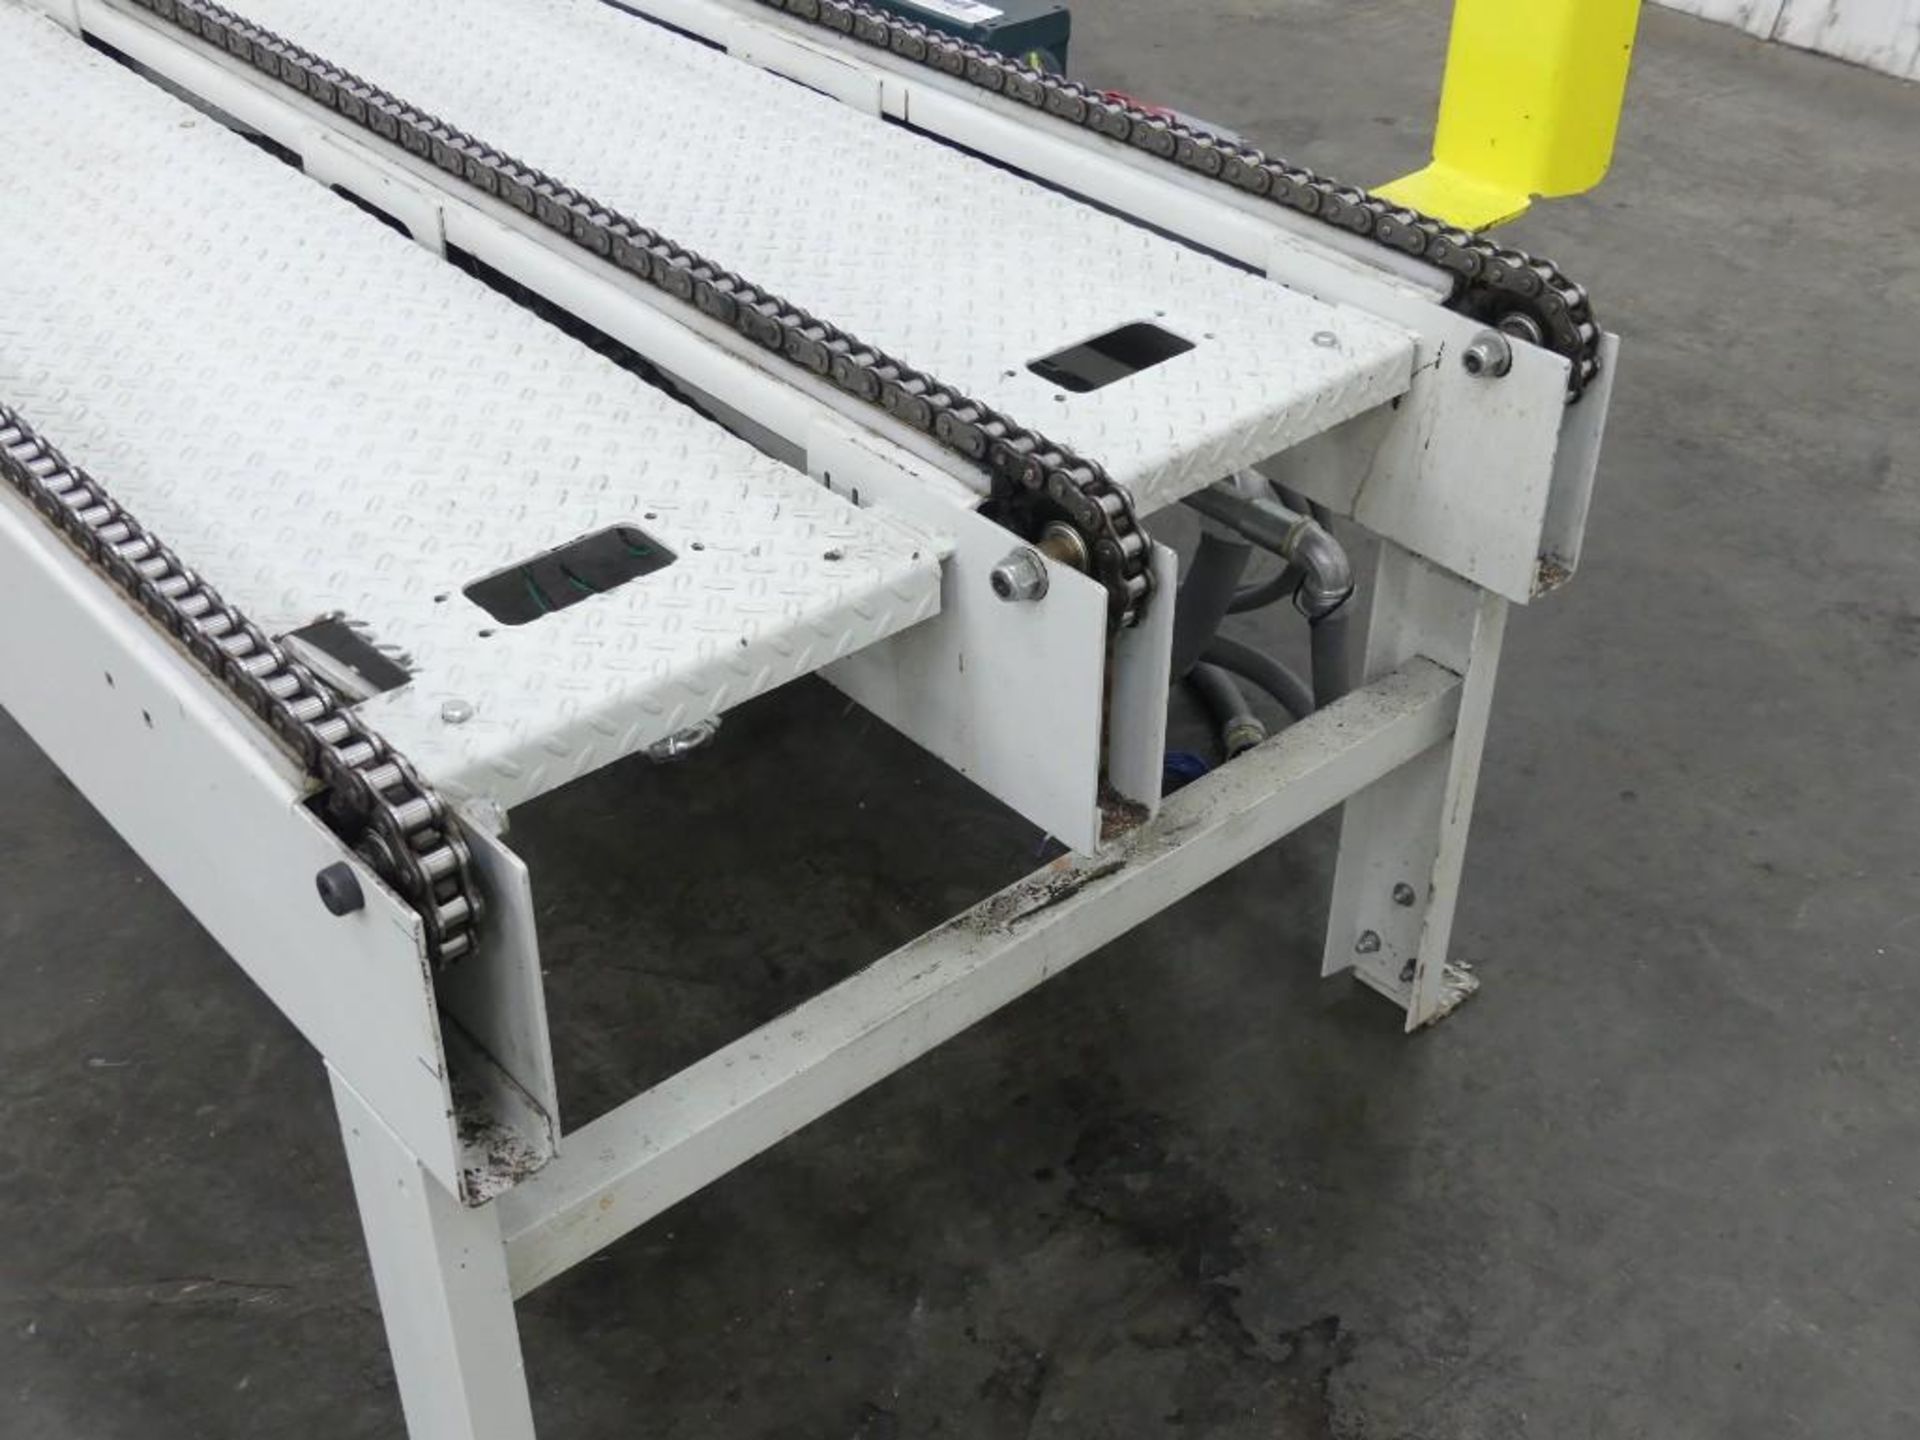 vonGAL 37 Inch x 66 Inch Chain Pallet Conveyor - Image 3 of 6